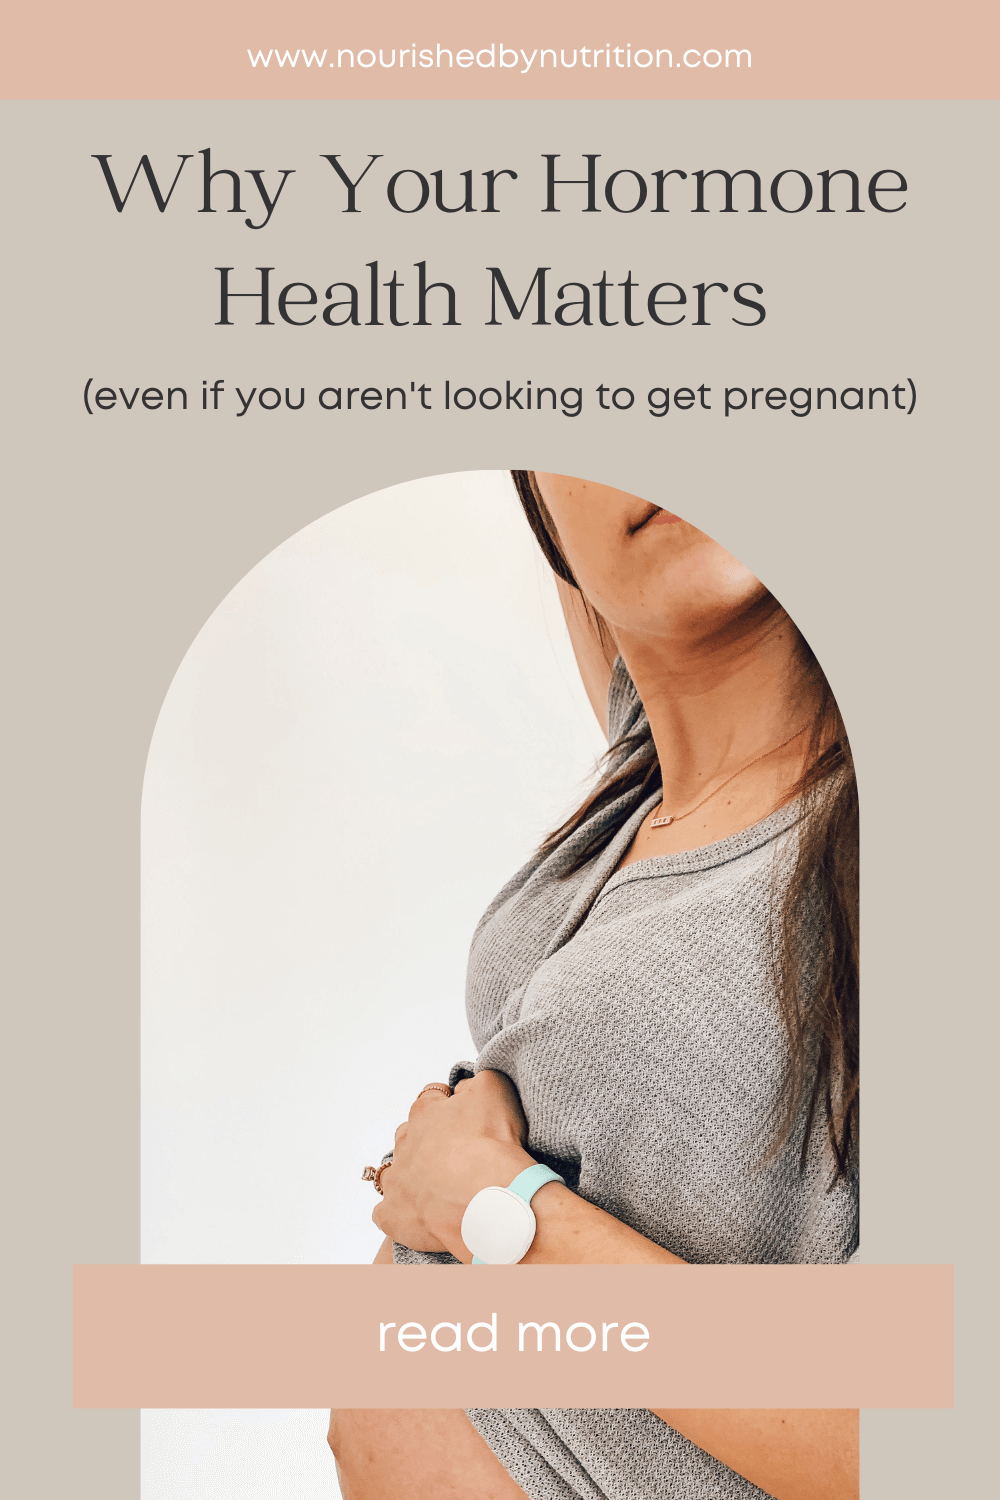 Why your hormone health matters